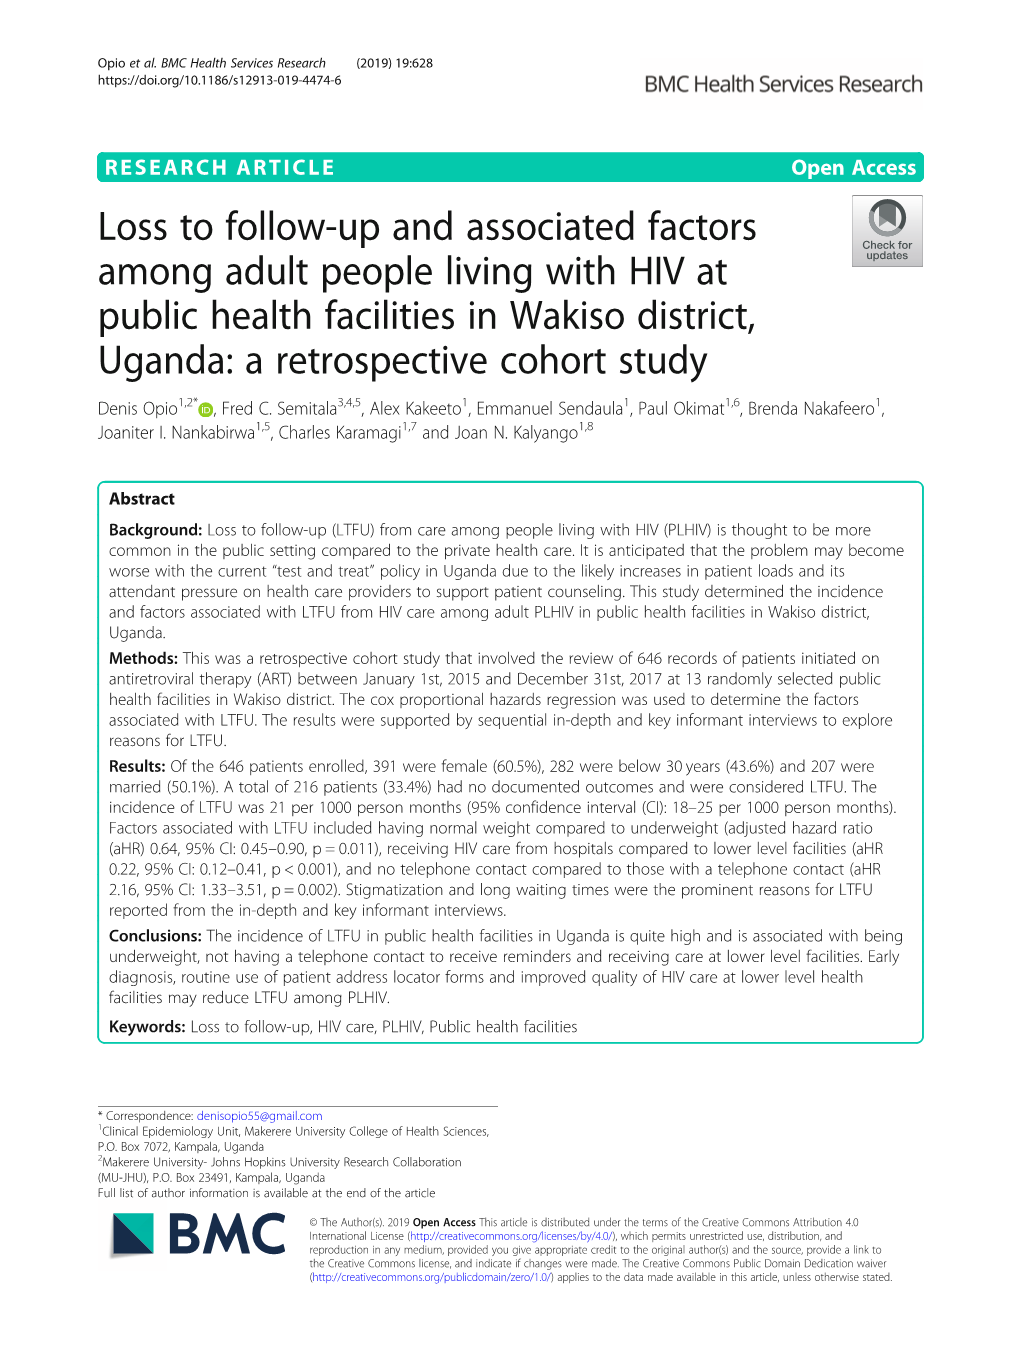 Loss to Follow-Up and Associated Factors Among Adult People Living